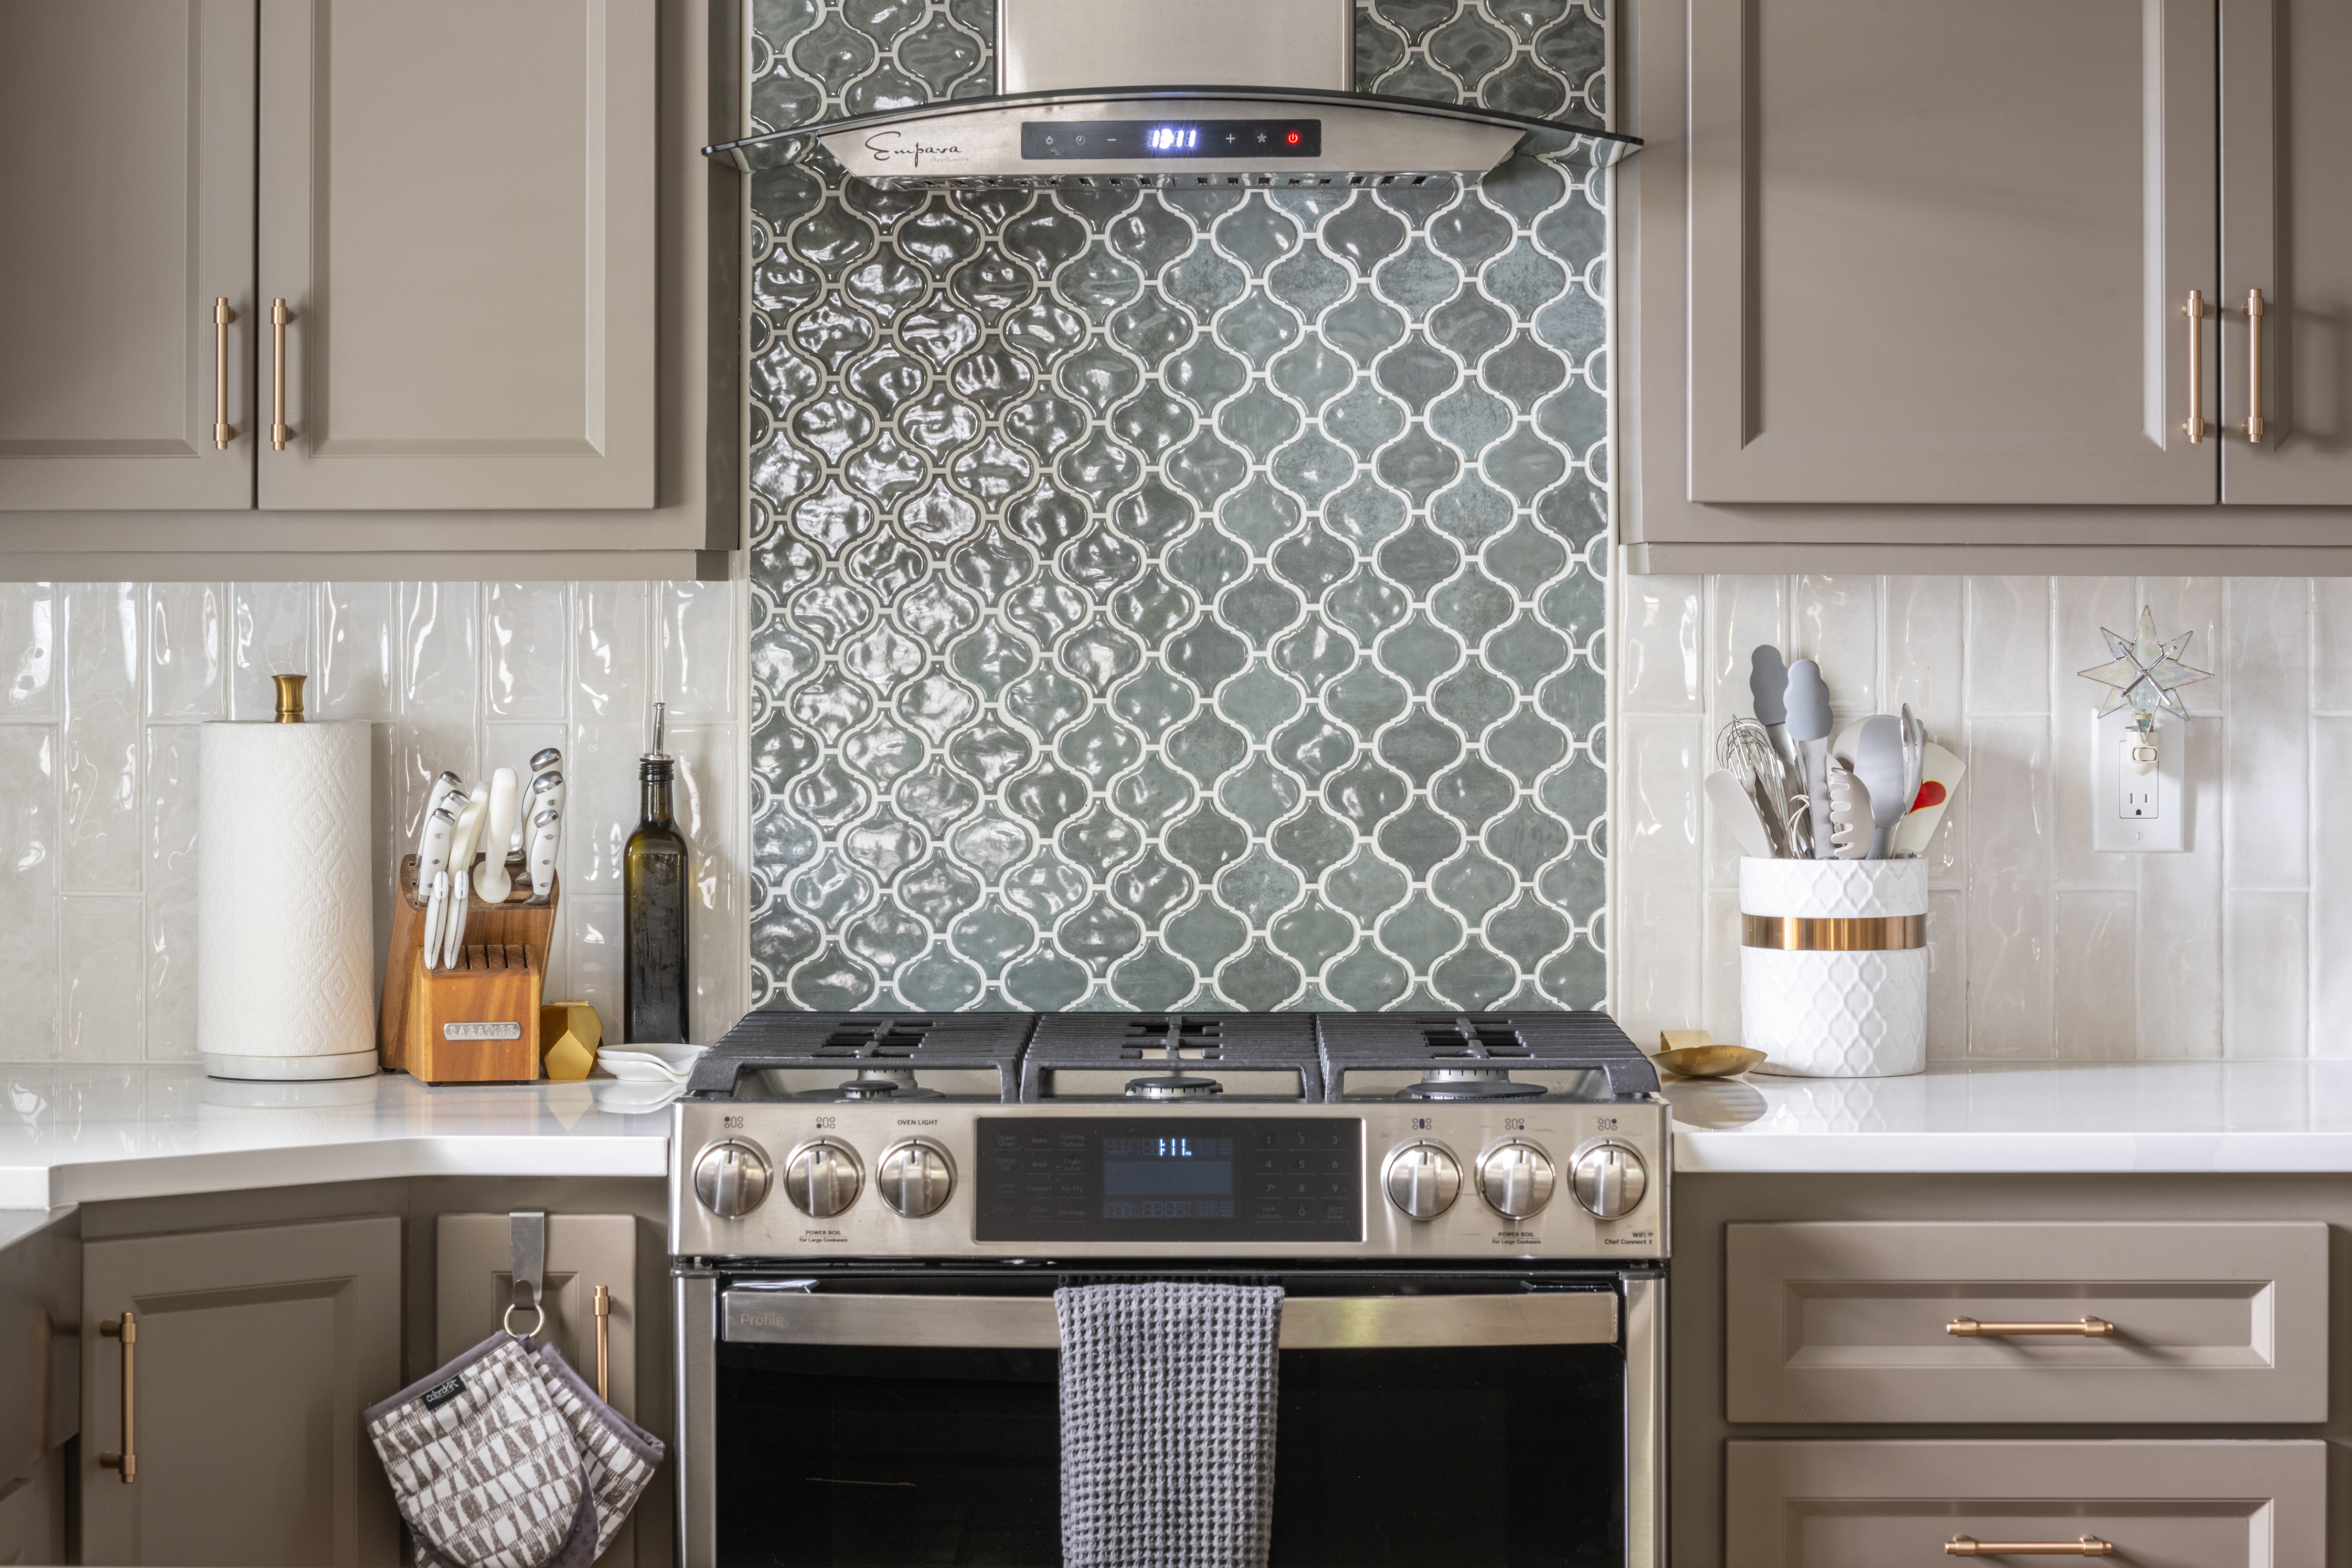 Cabinet Refacing The Future Of Kitchen